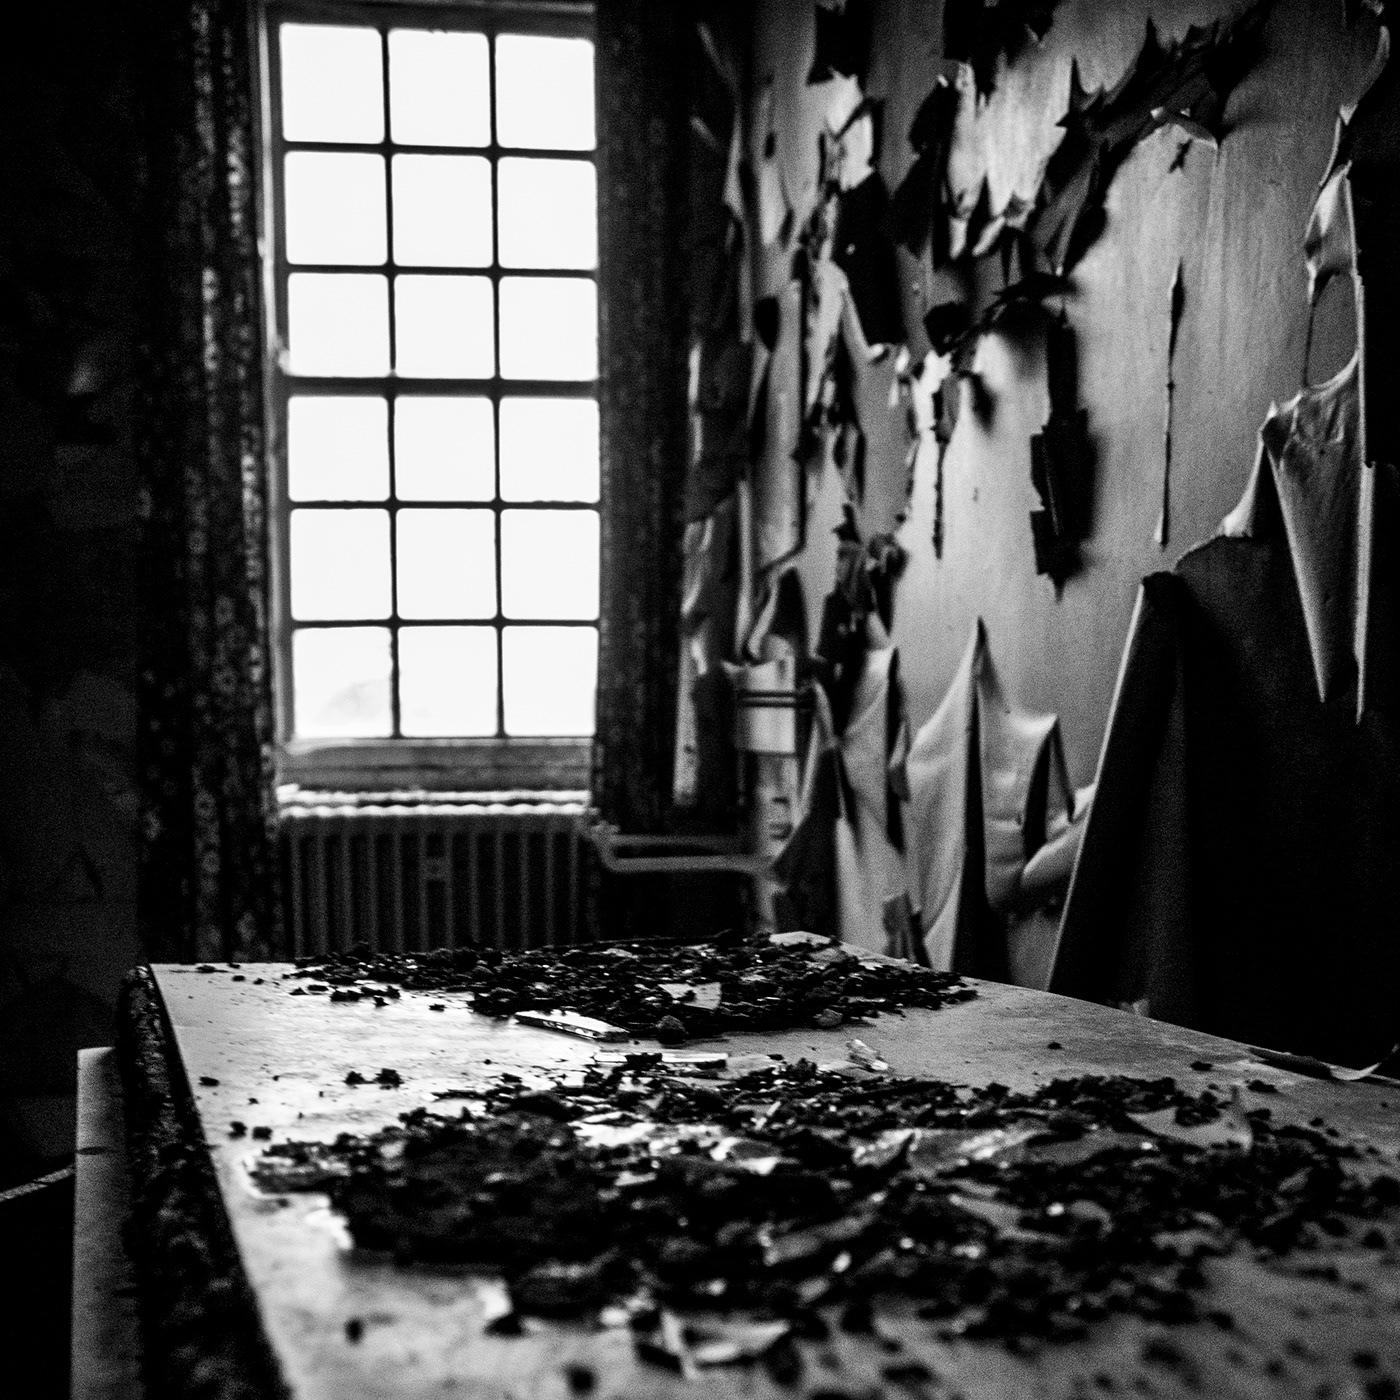 abandoned abandoned places architecture black and white decay derelict forgotten urban exploration urbex urbex photography